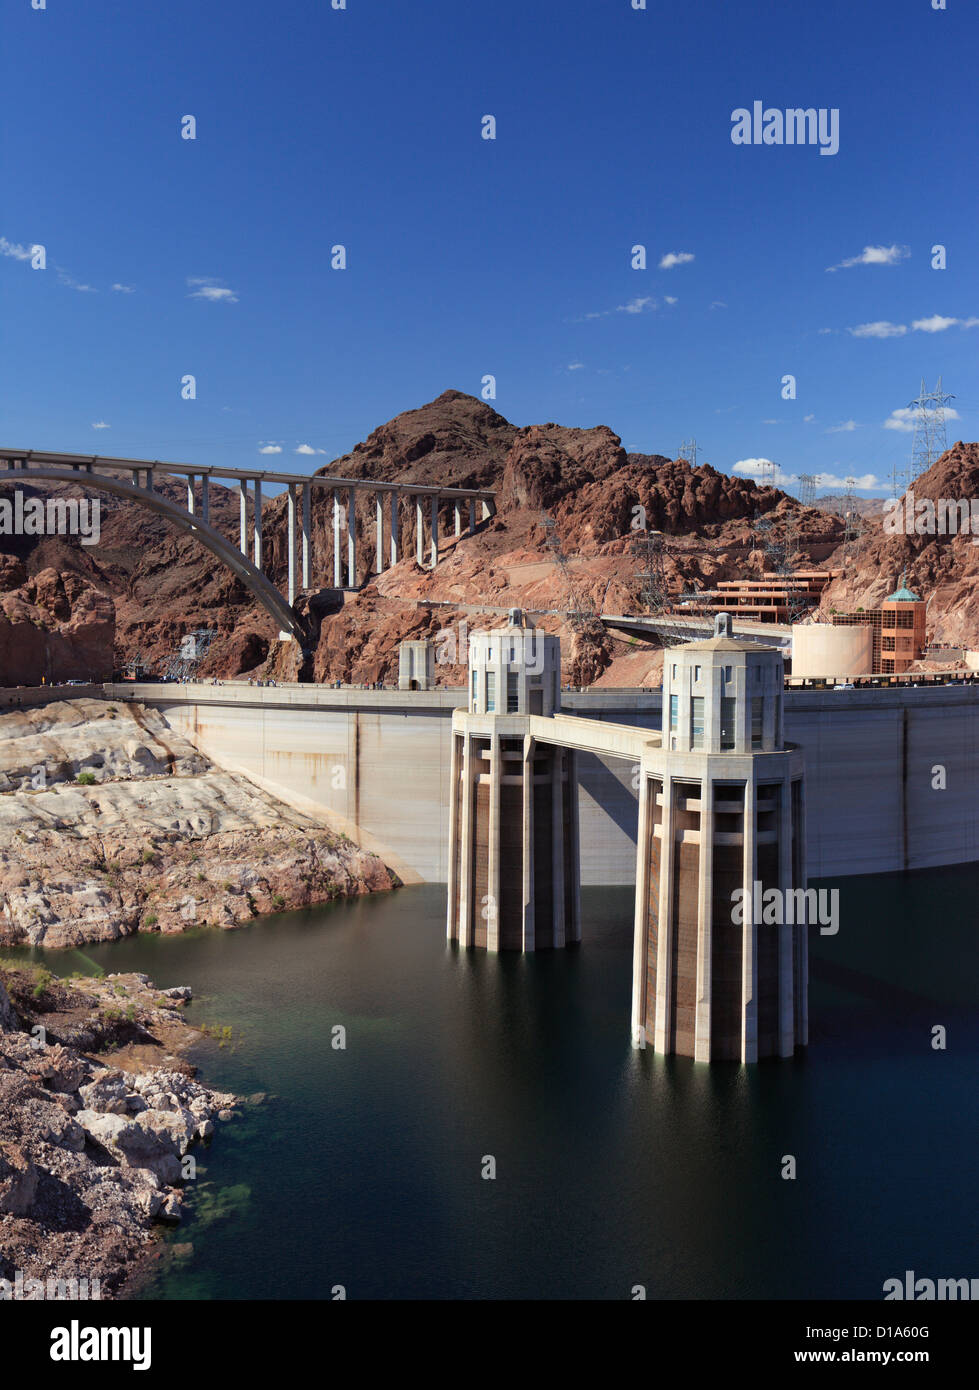 Hoover Dam and Lake Mead on the Colorado River in Nevada, USA. Stock Photo